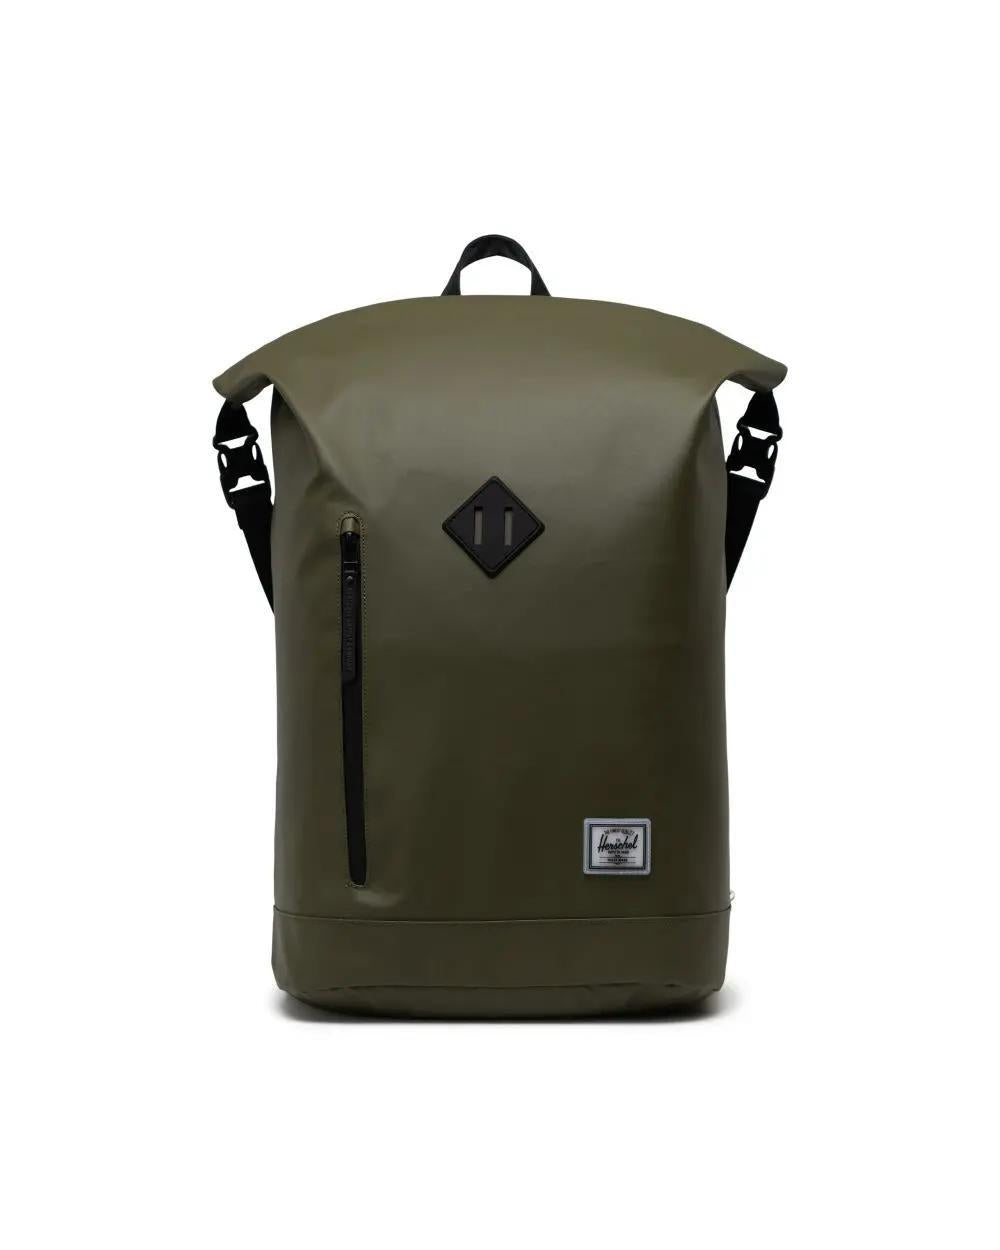 Roll Top Backpack - Ivy Green Weather Resistant